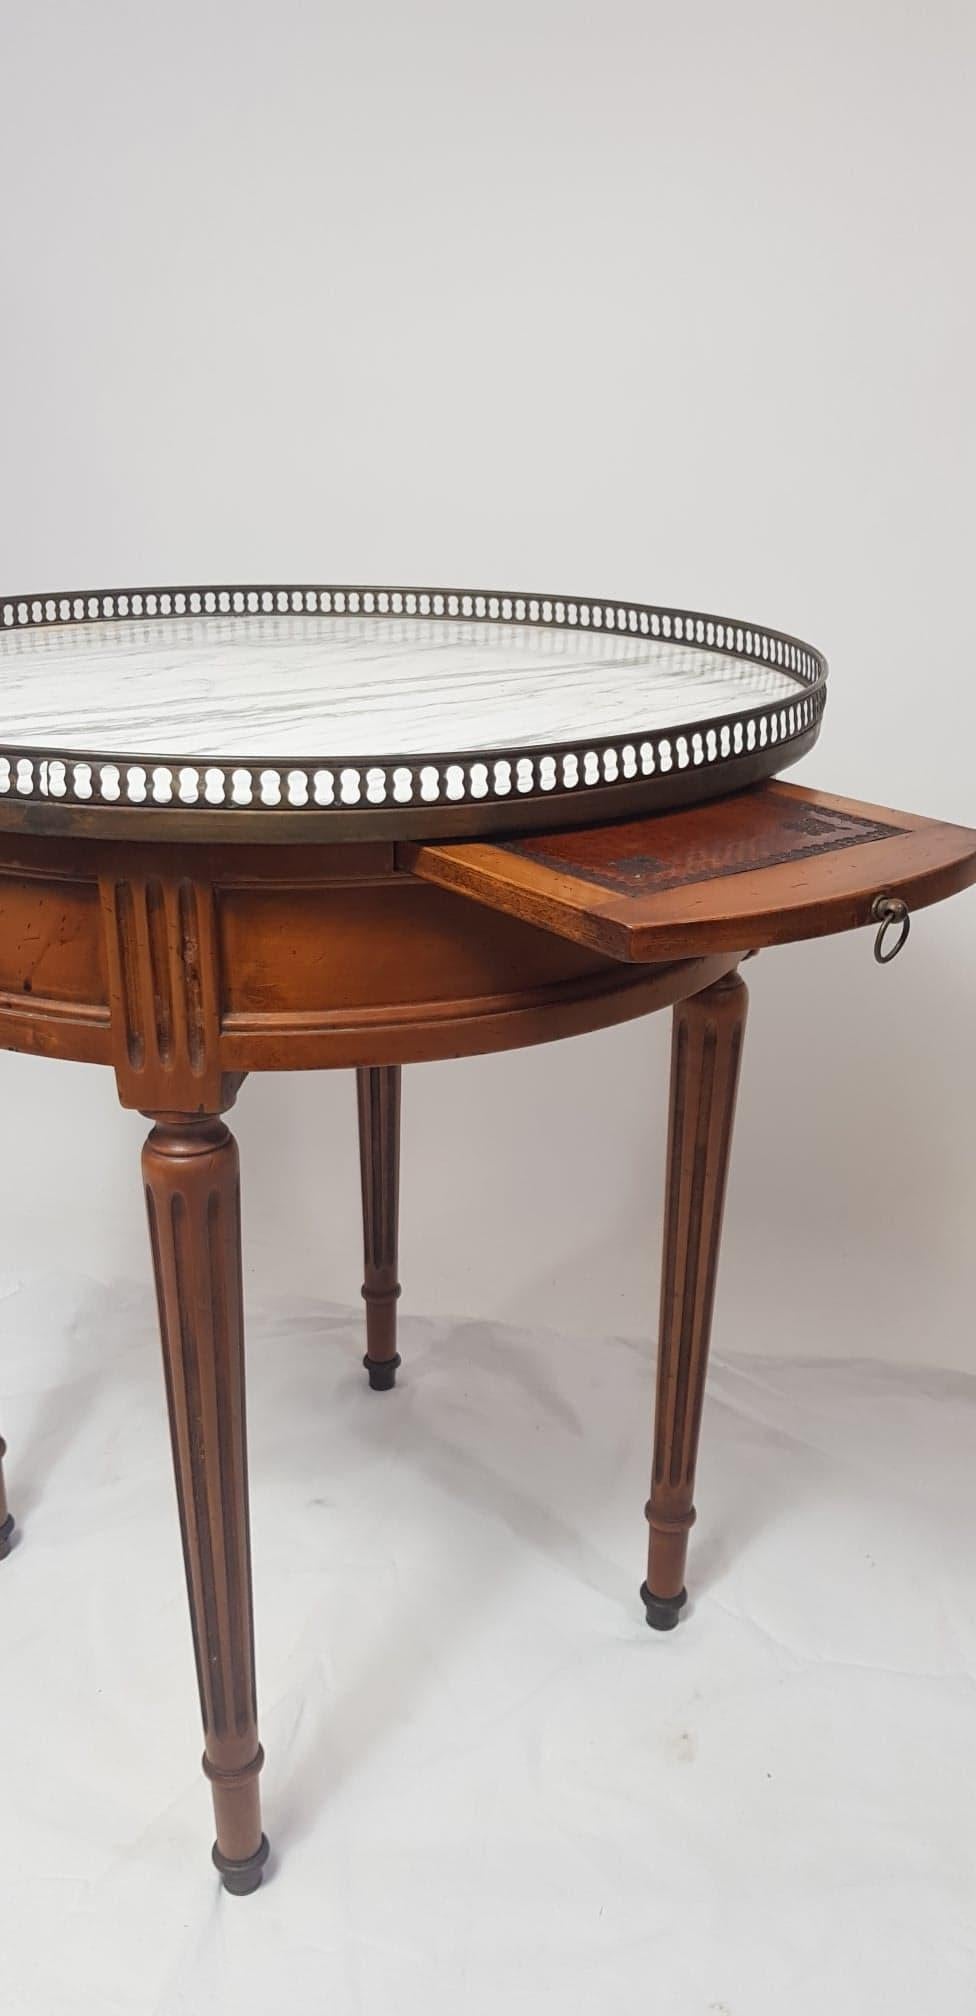 Early 20th century, Louis XVI style, bouillotte table in walnut with marble top and pierced gallery in brasse. Two drawers, and two leather covered pull-out leaves.
In perfect condition with a simple wax finish.
 